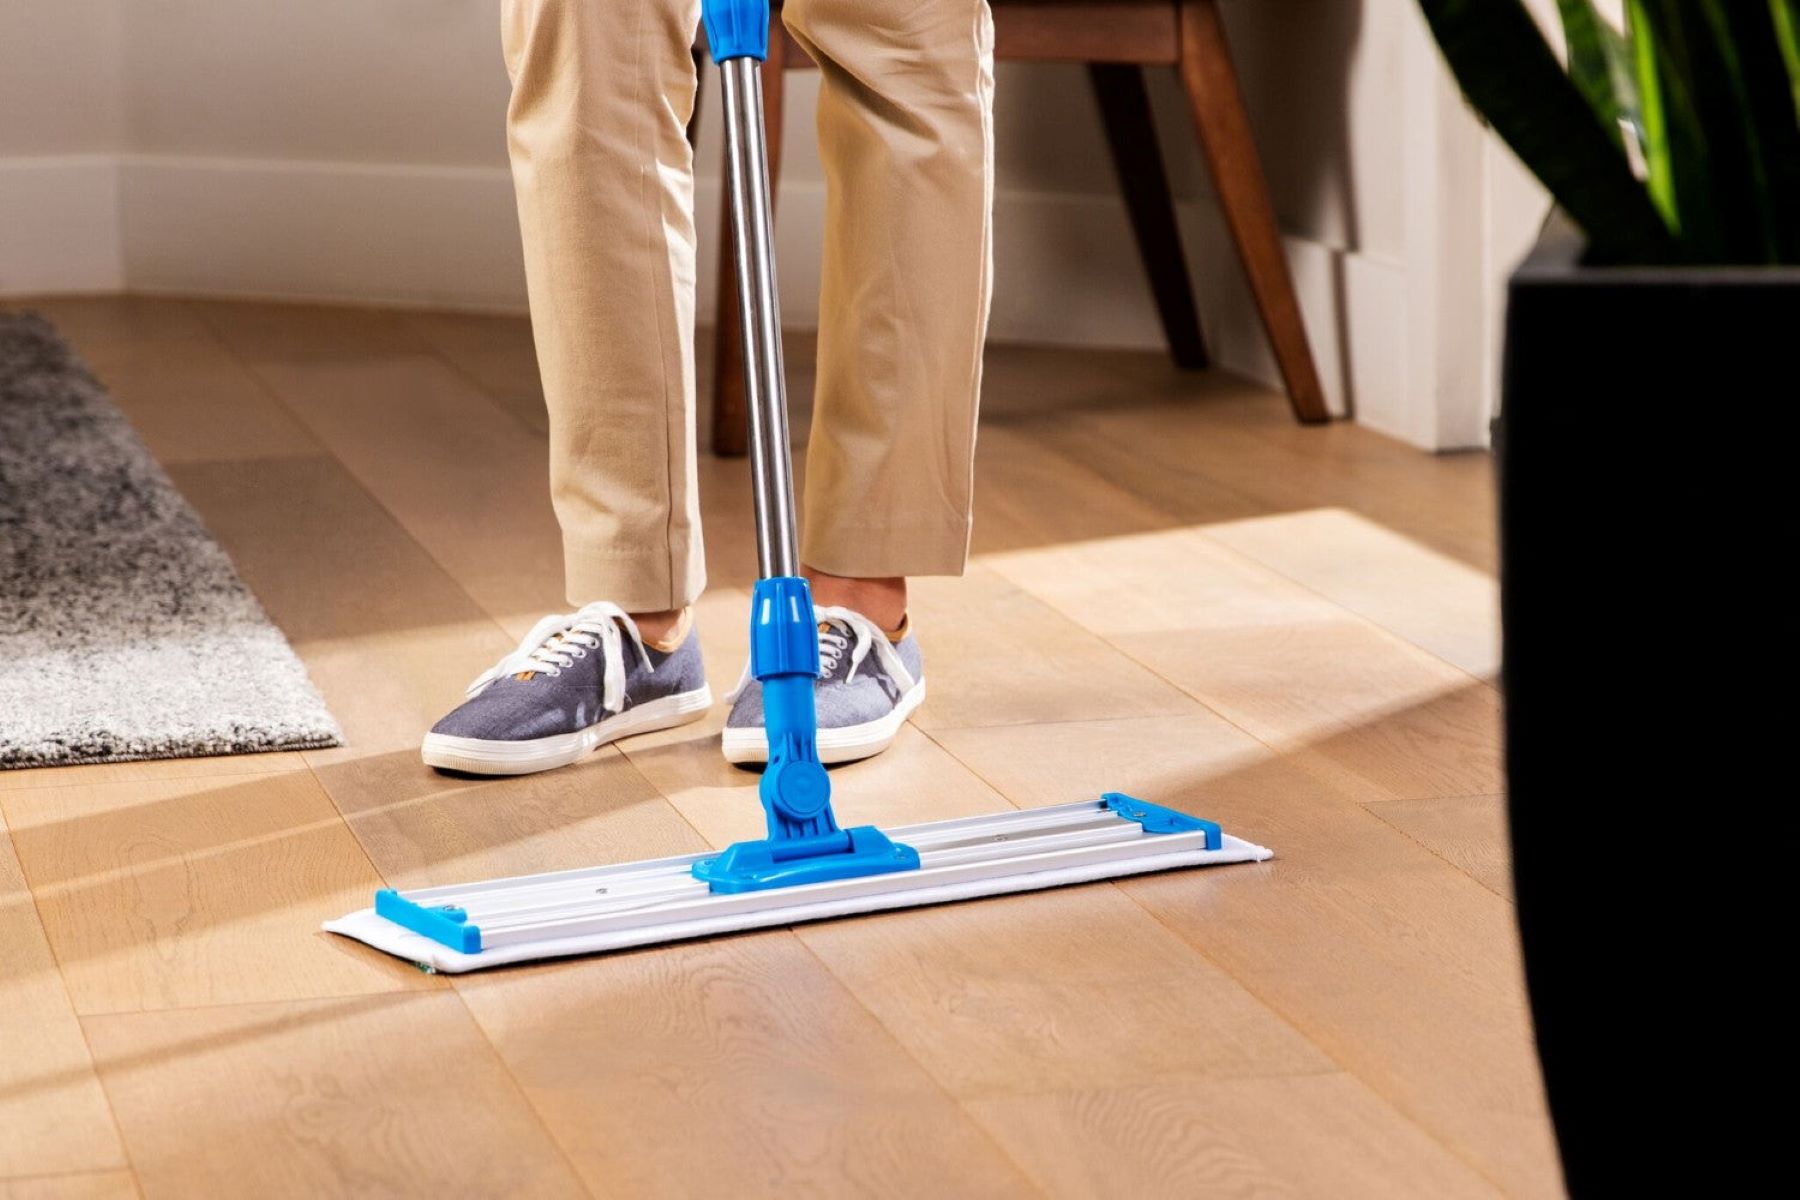 How To Wash Dust Mop